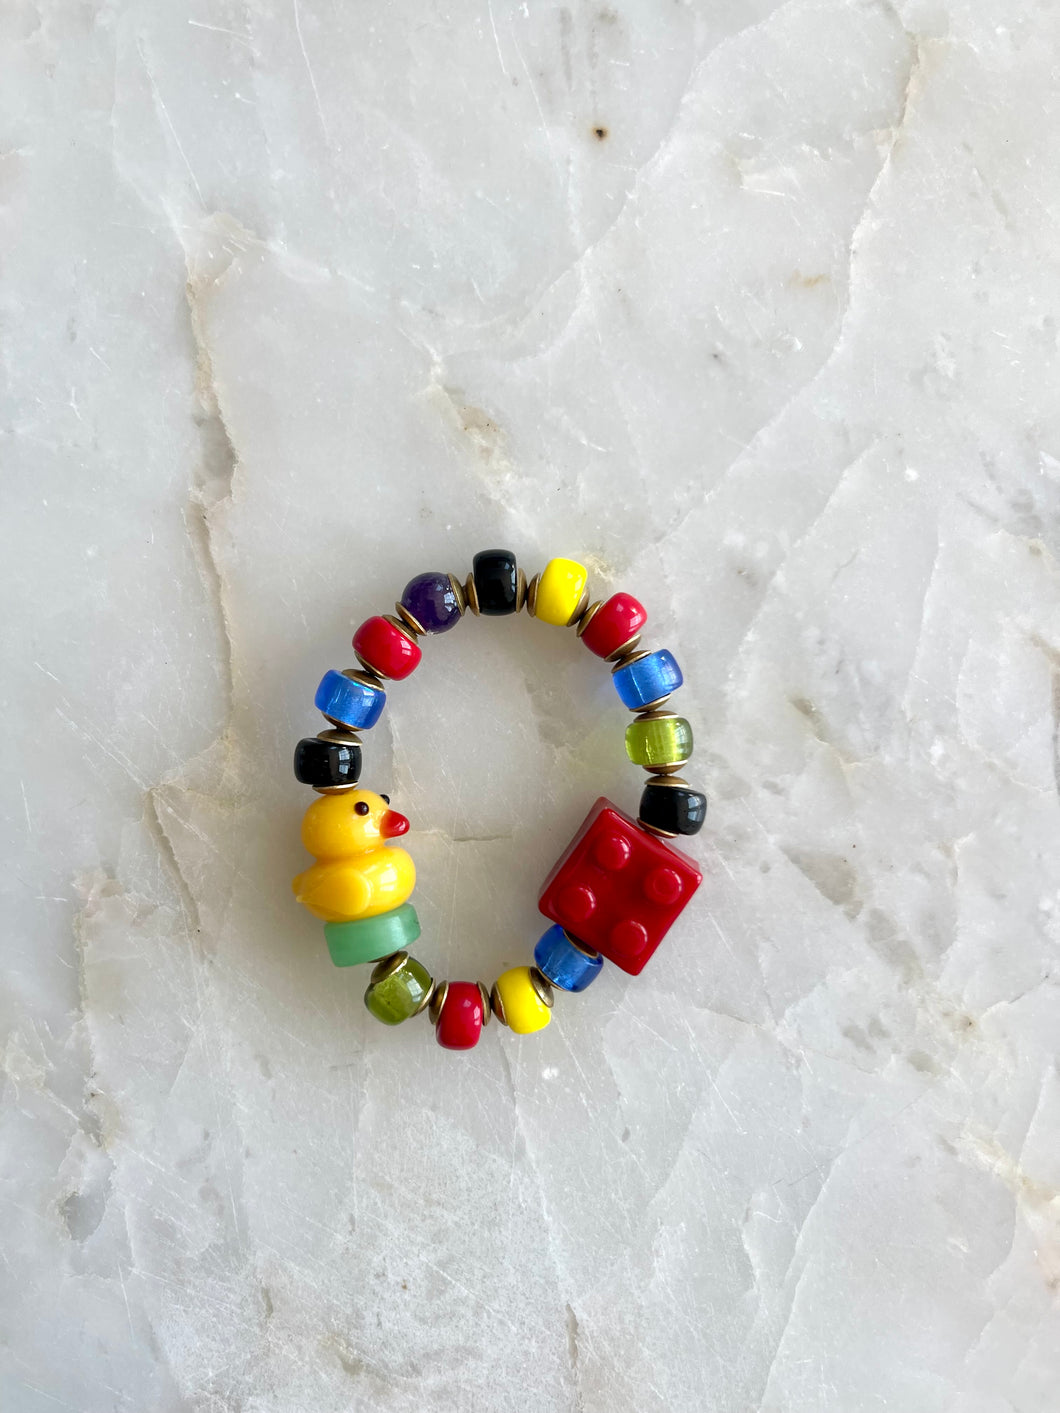 The Who Gives a Duck?! Let's Build bracelet